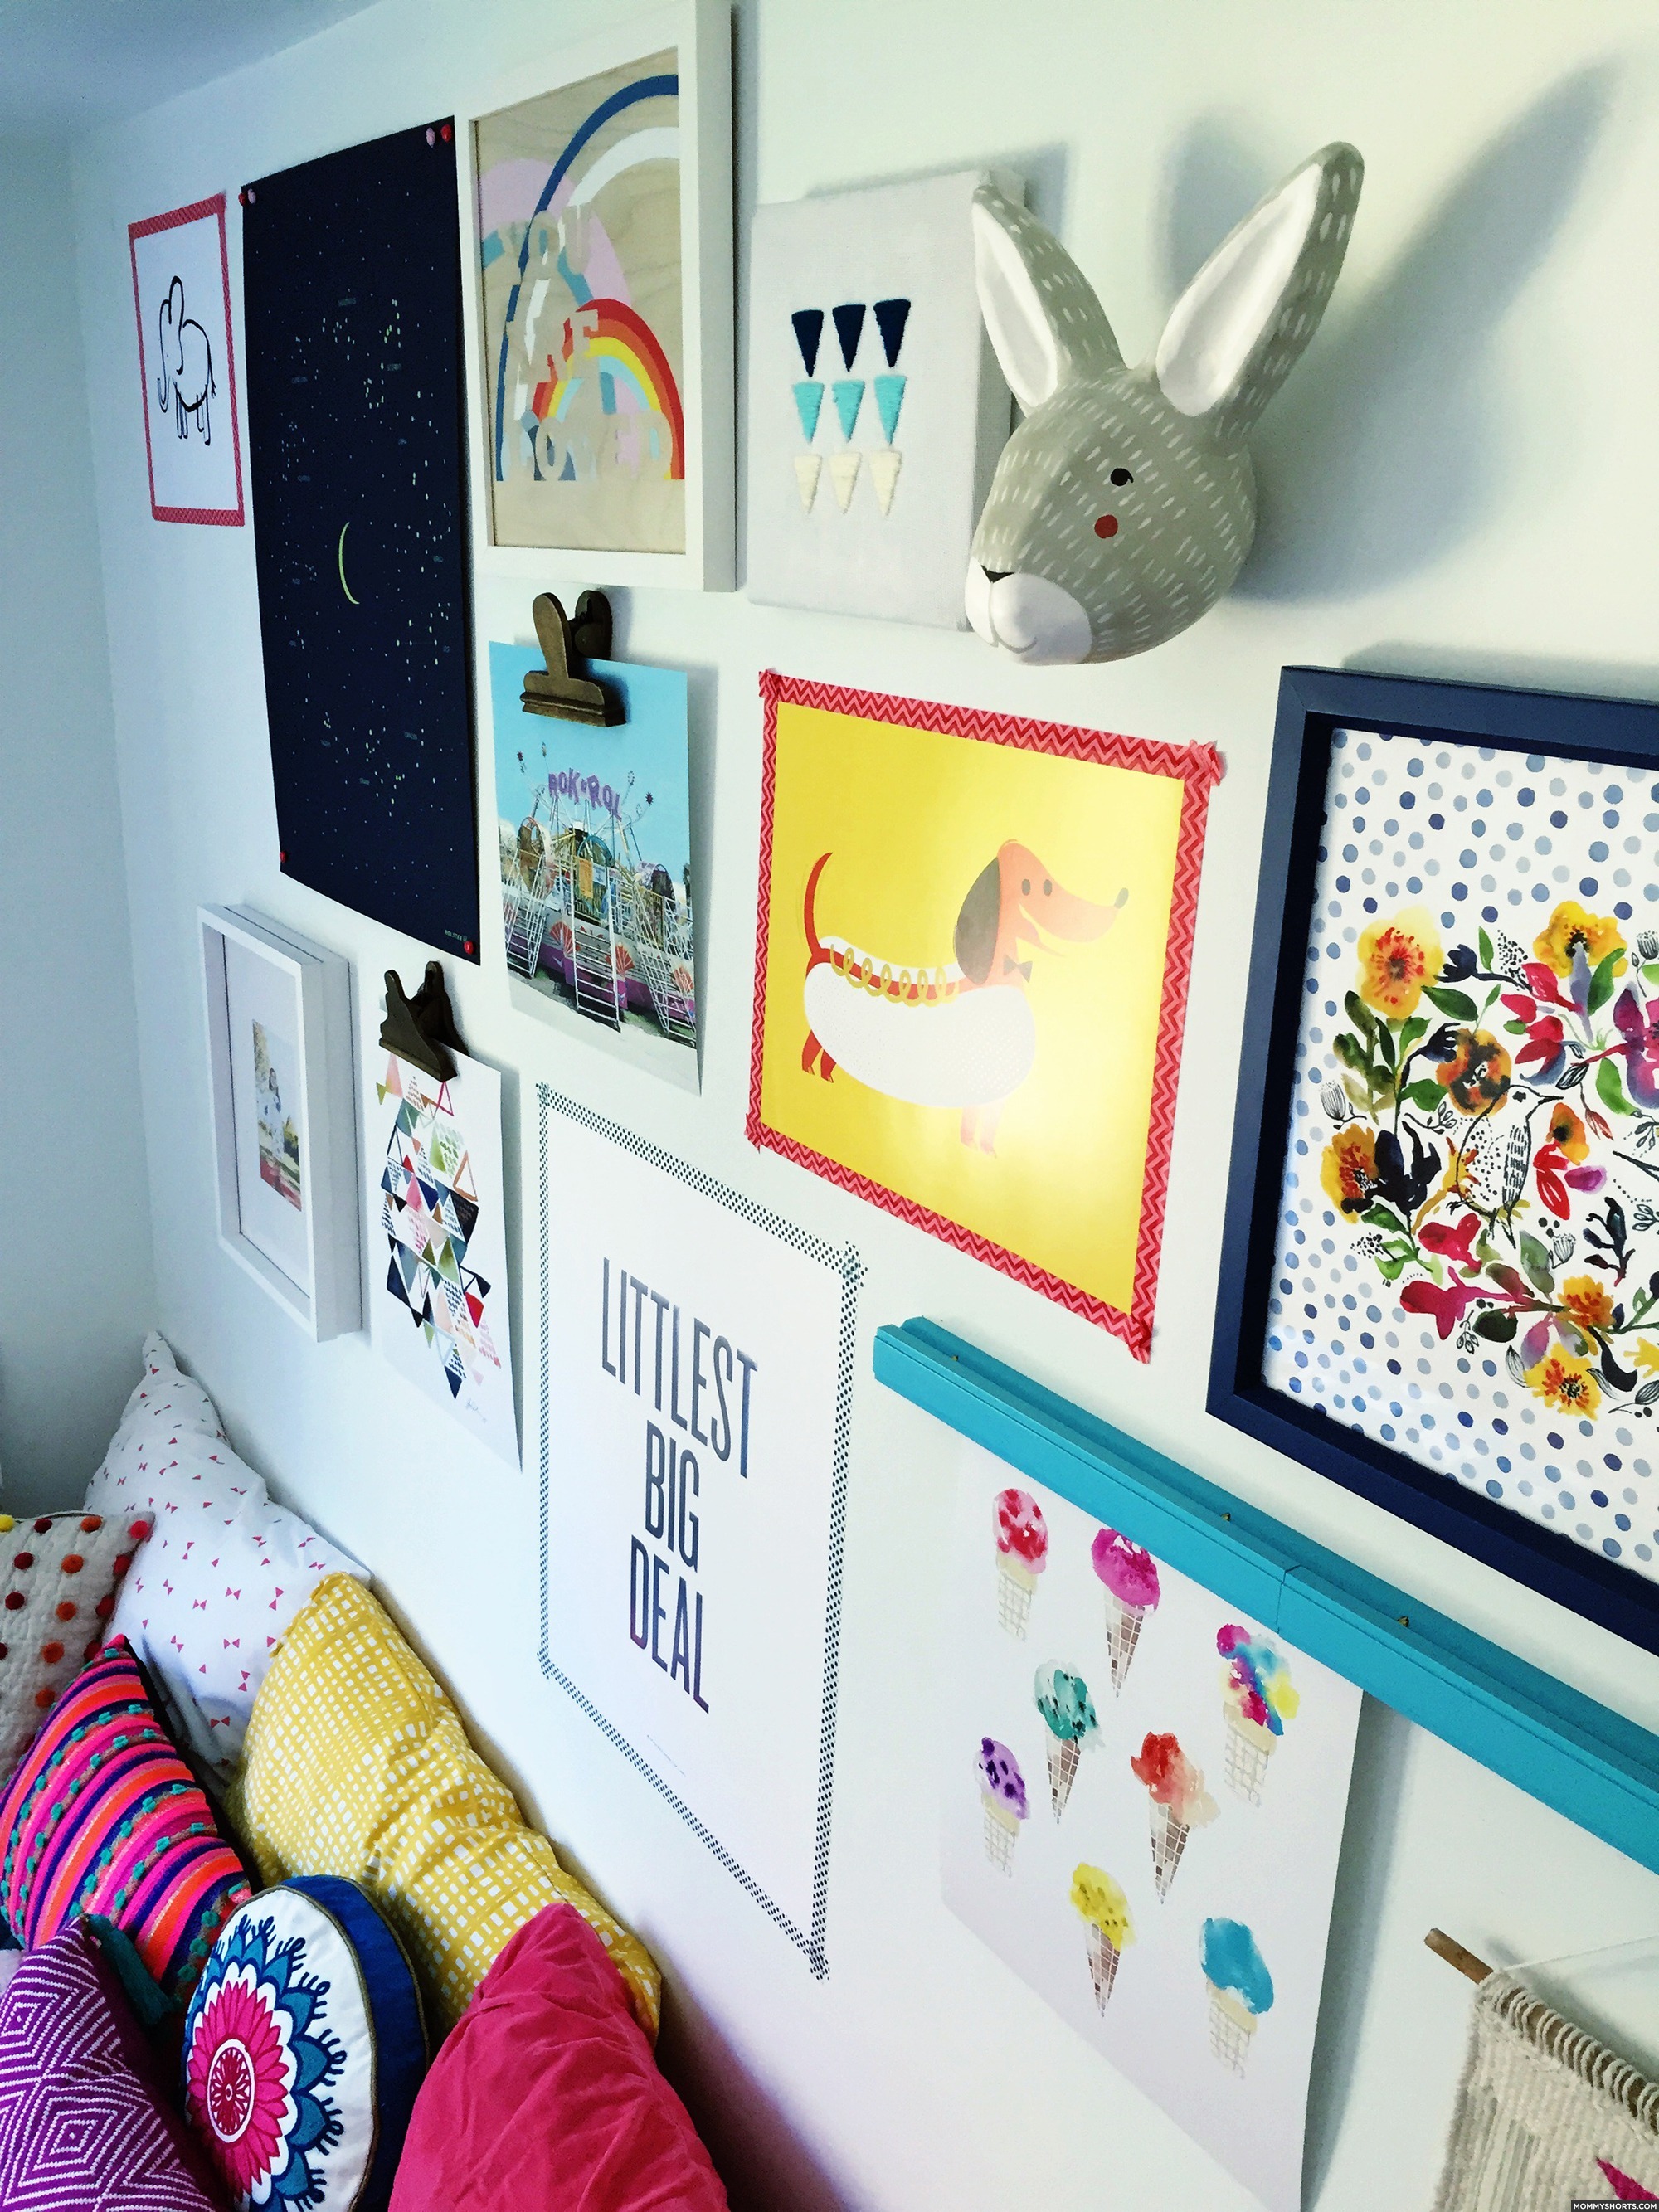 Amazing Gallery Wall for a Kids Bedroom!